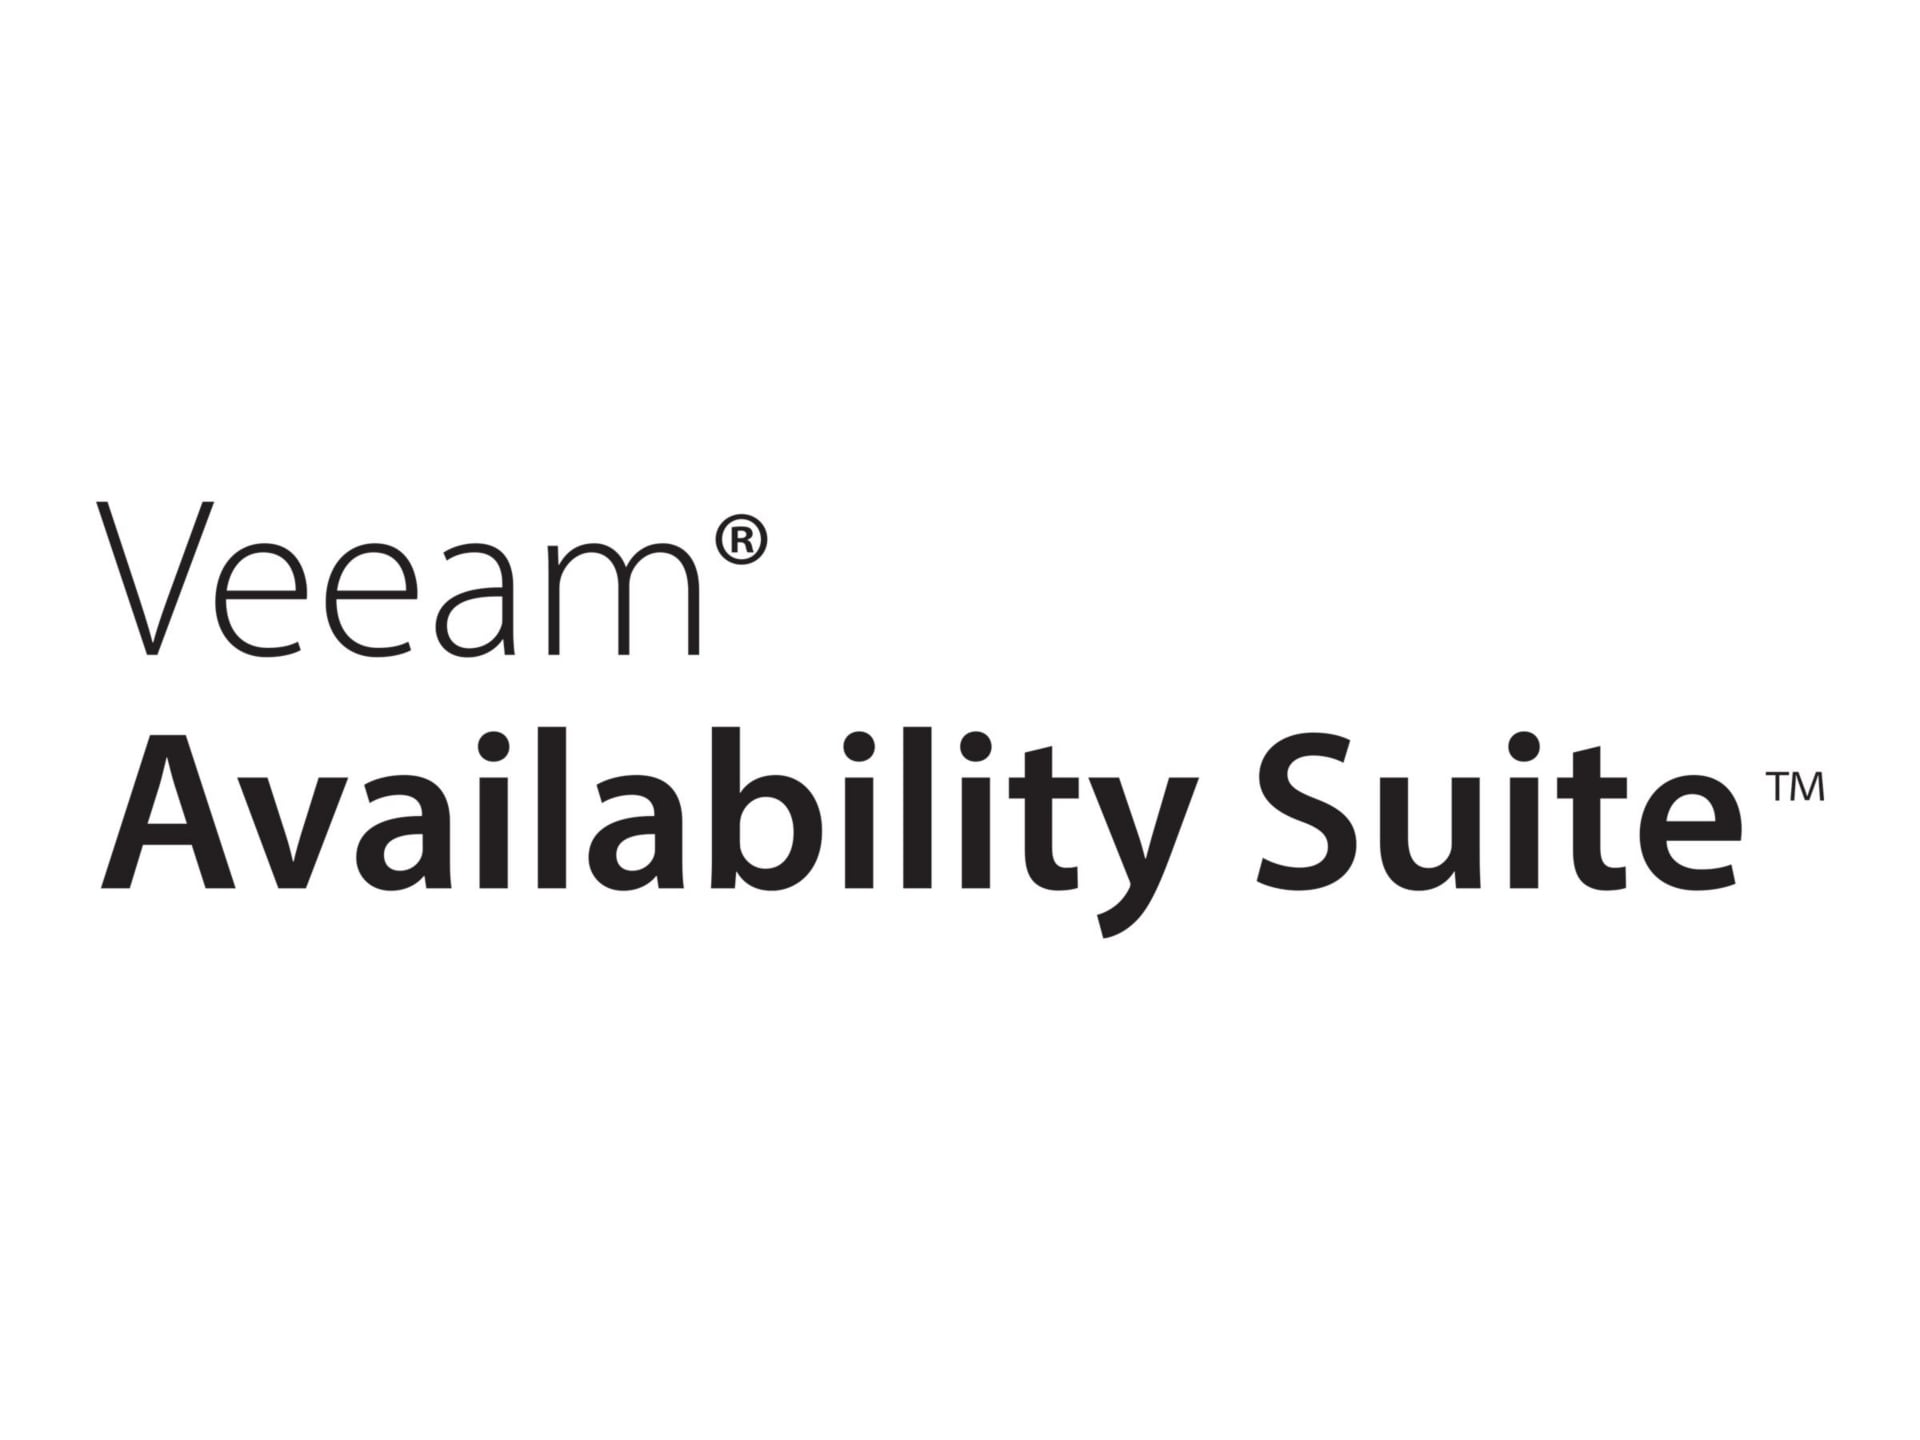 Veeam Availability Suite Universal License - Upfront Billing License (4 yea